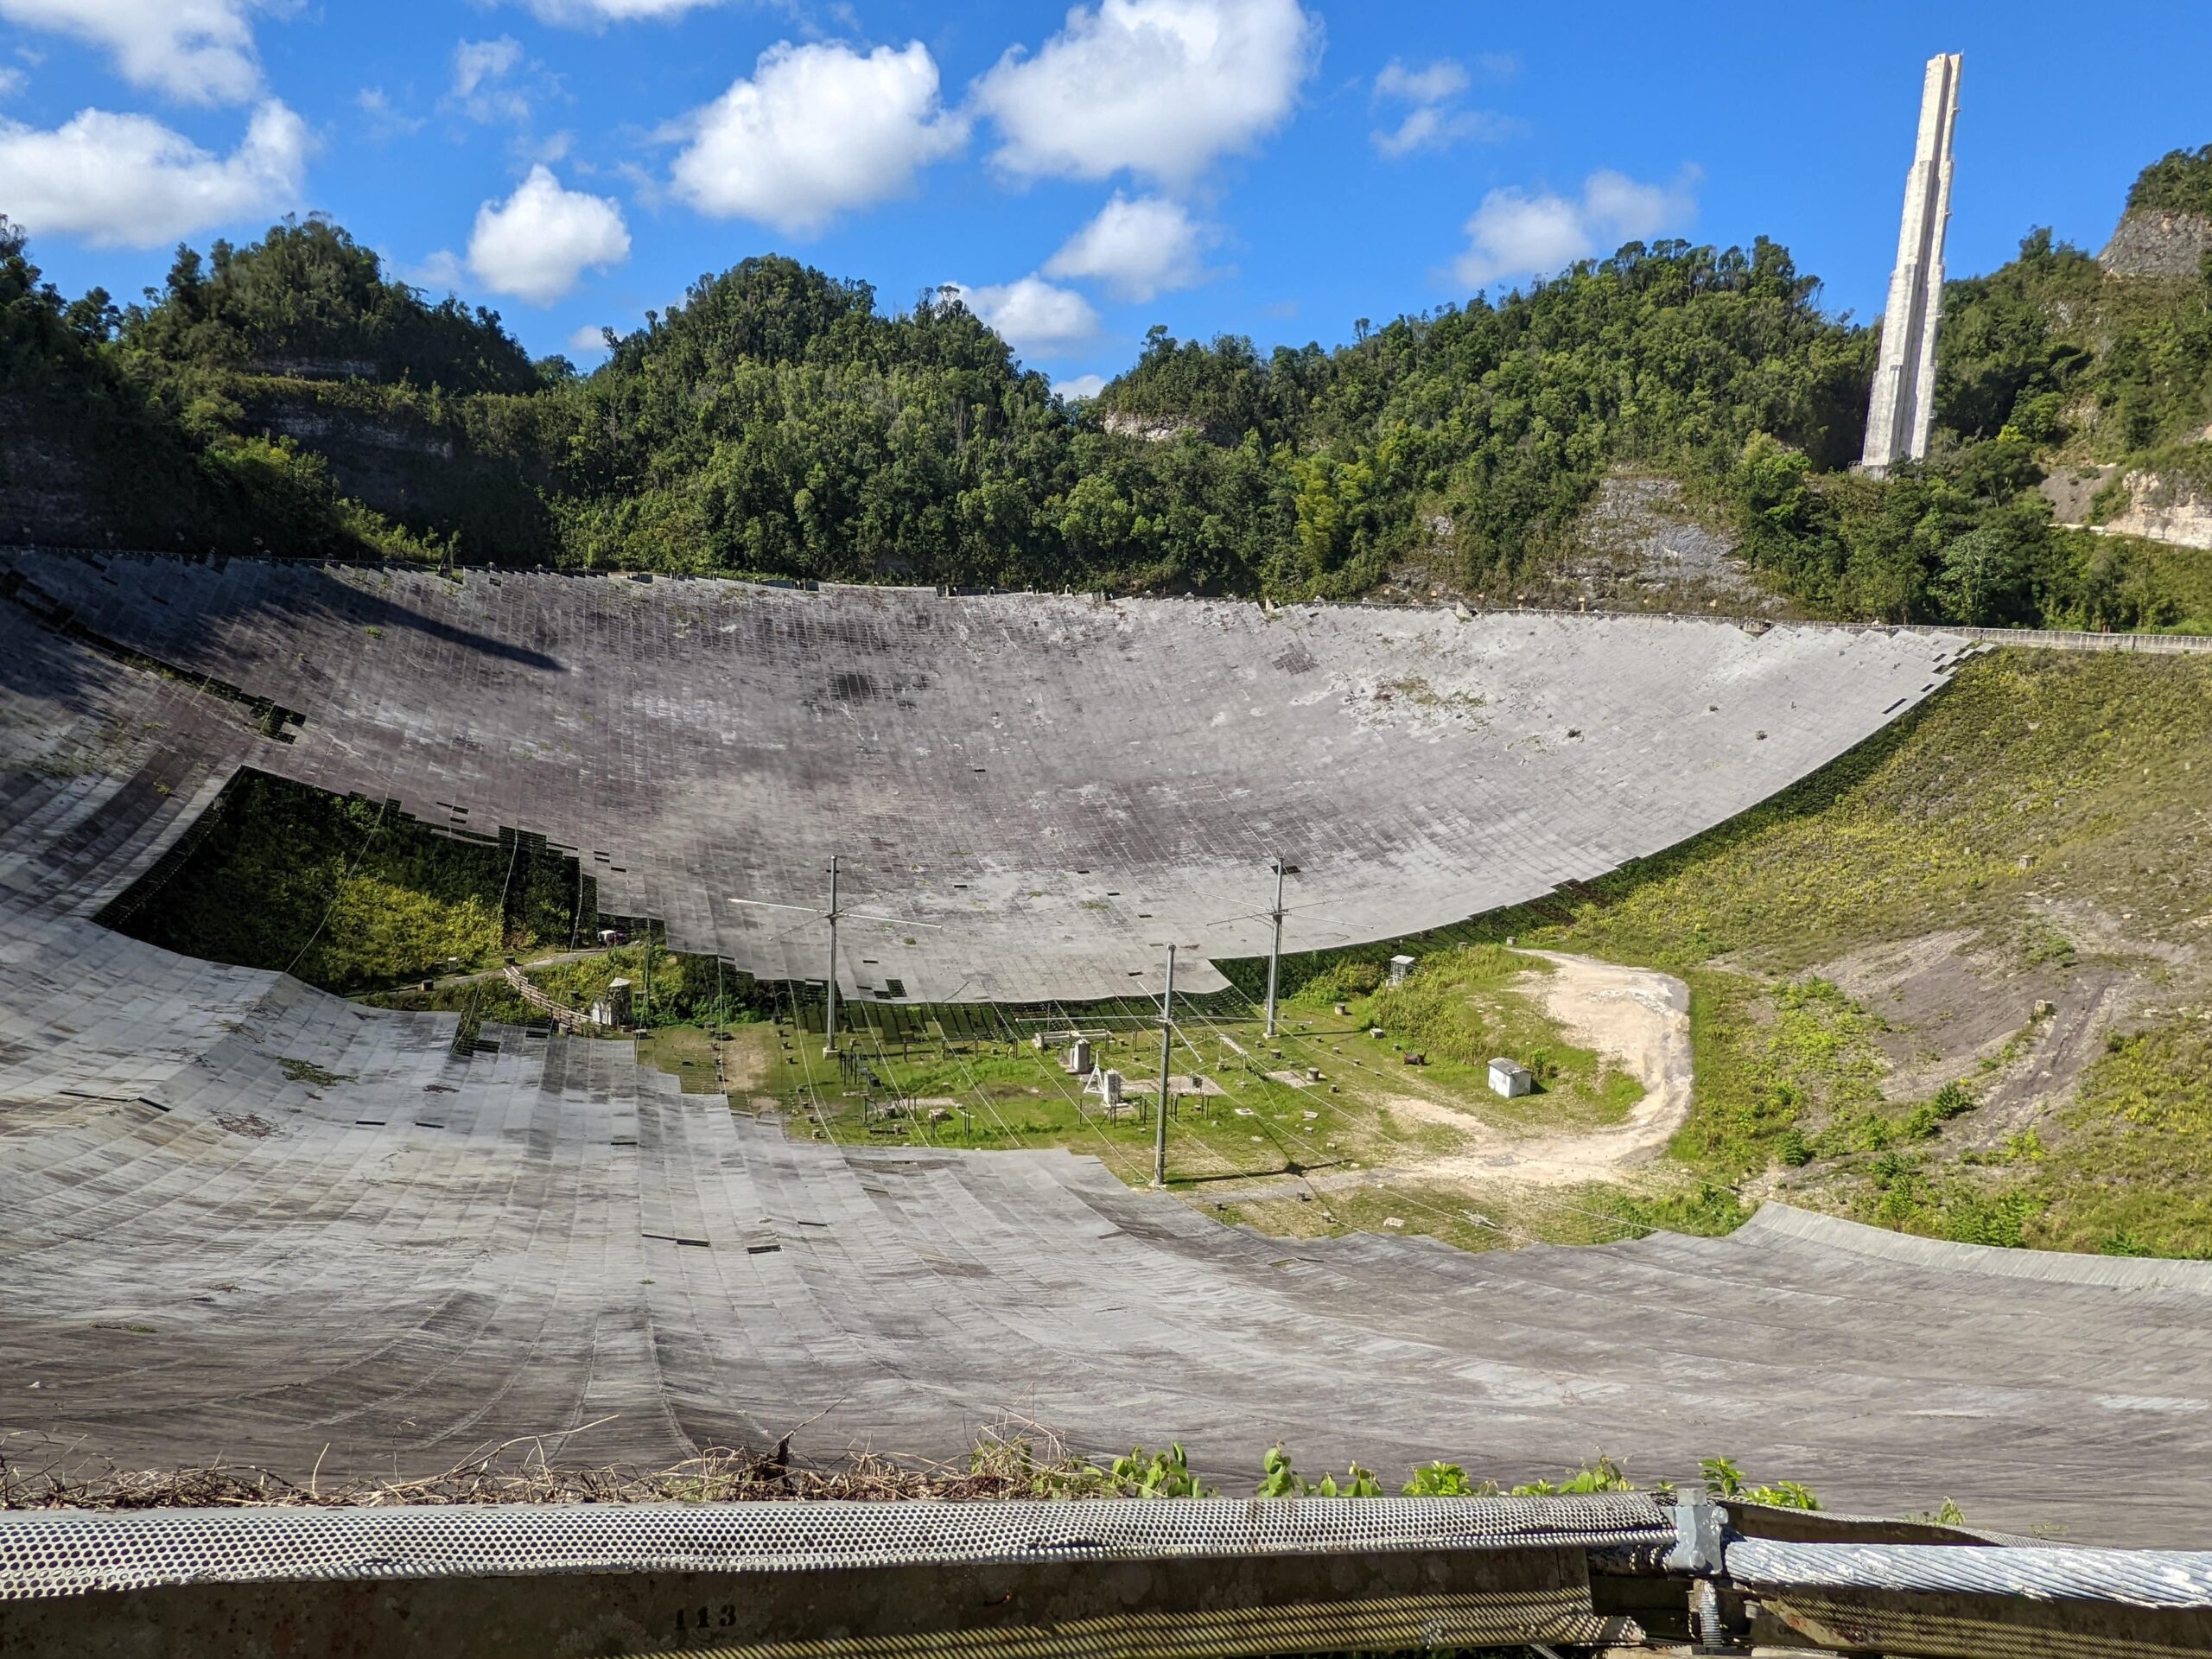 The remains of the Arecibo Telescope dish as viewed from the rim. About 40% of the grey dish is missing, revealing the green foliage underneath